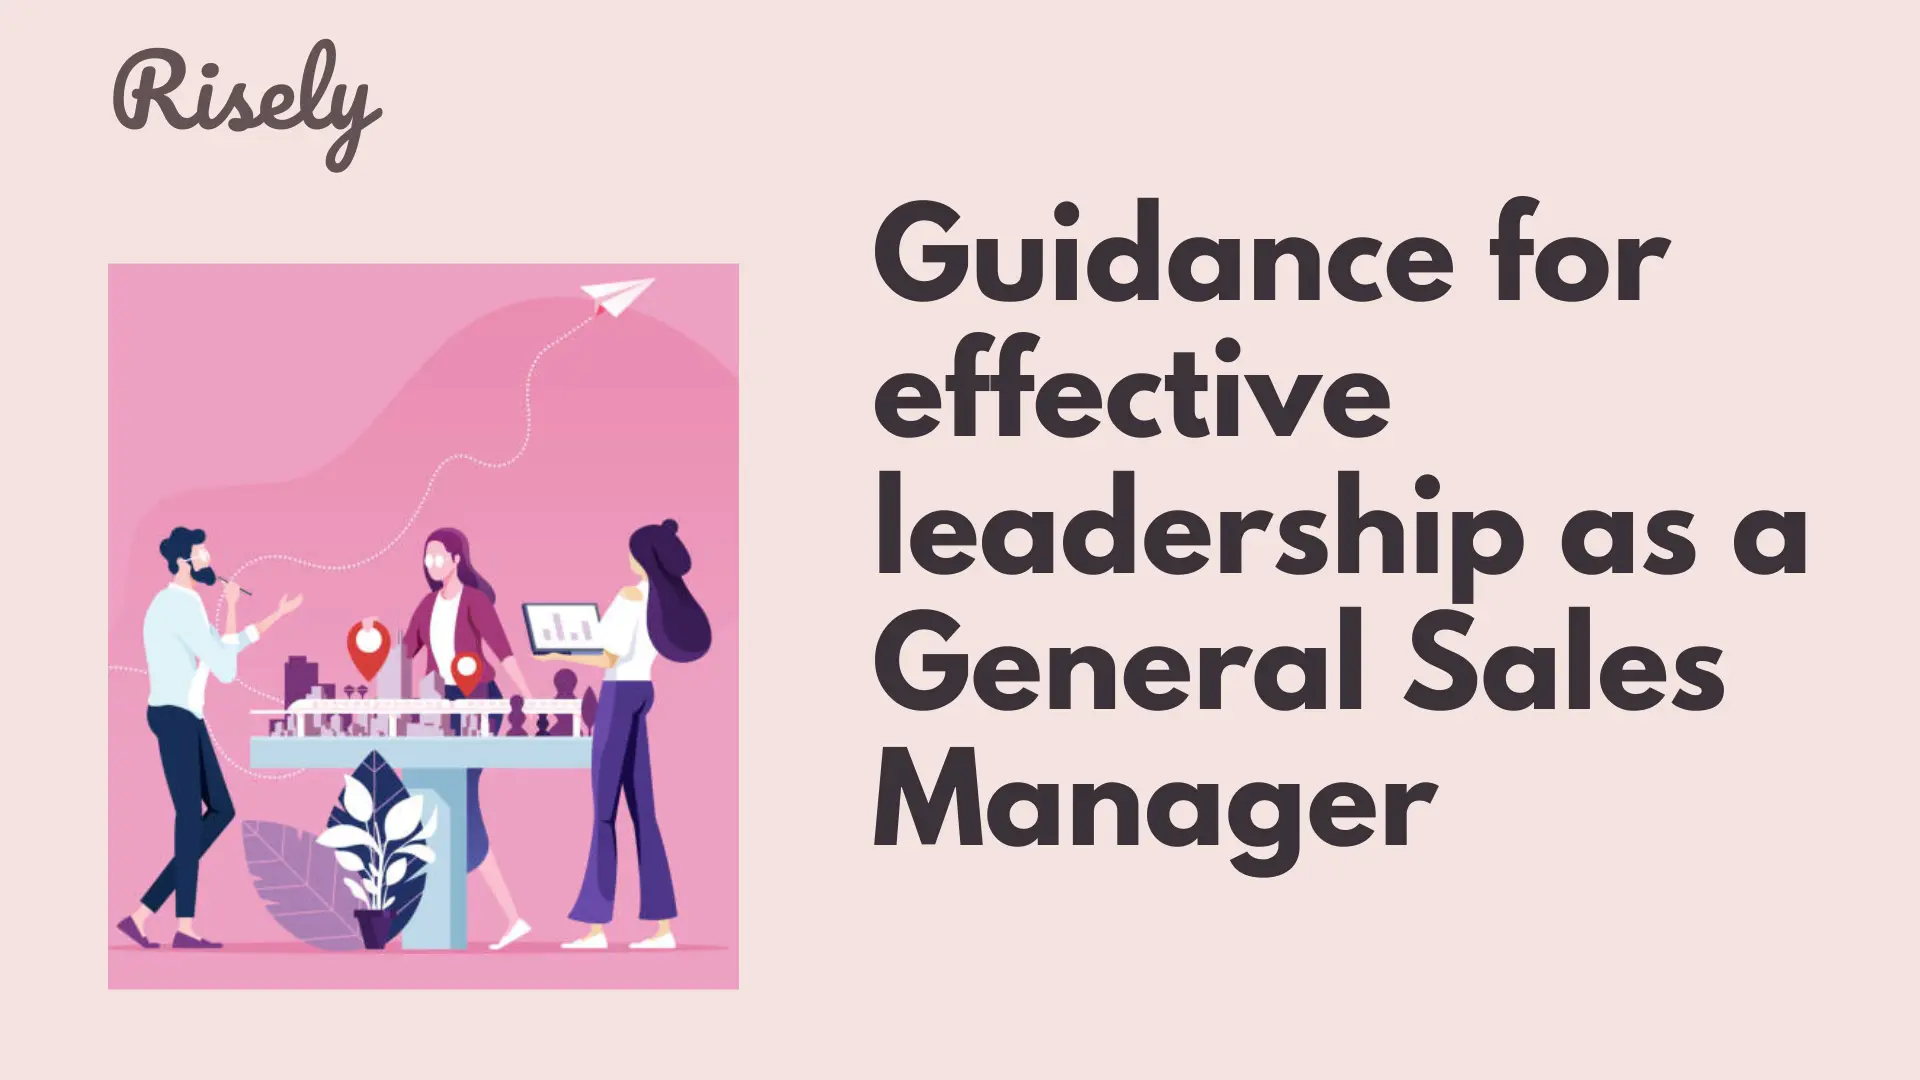 Guidance for effective leadership as a General Sales Manager